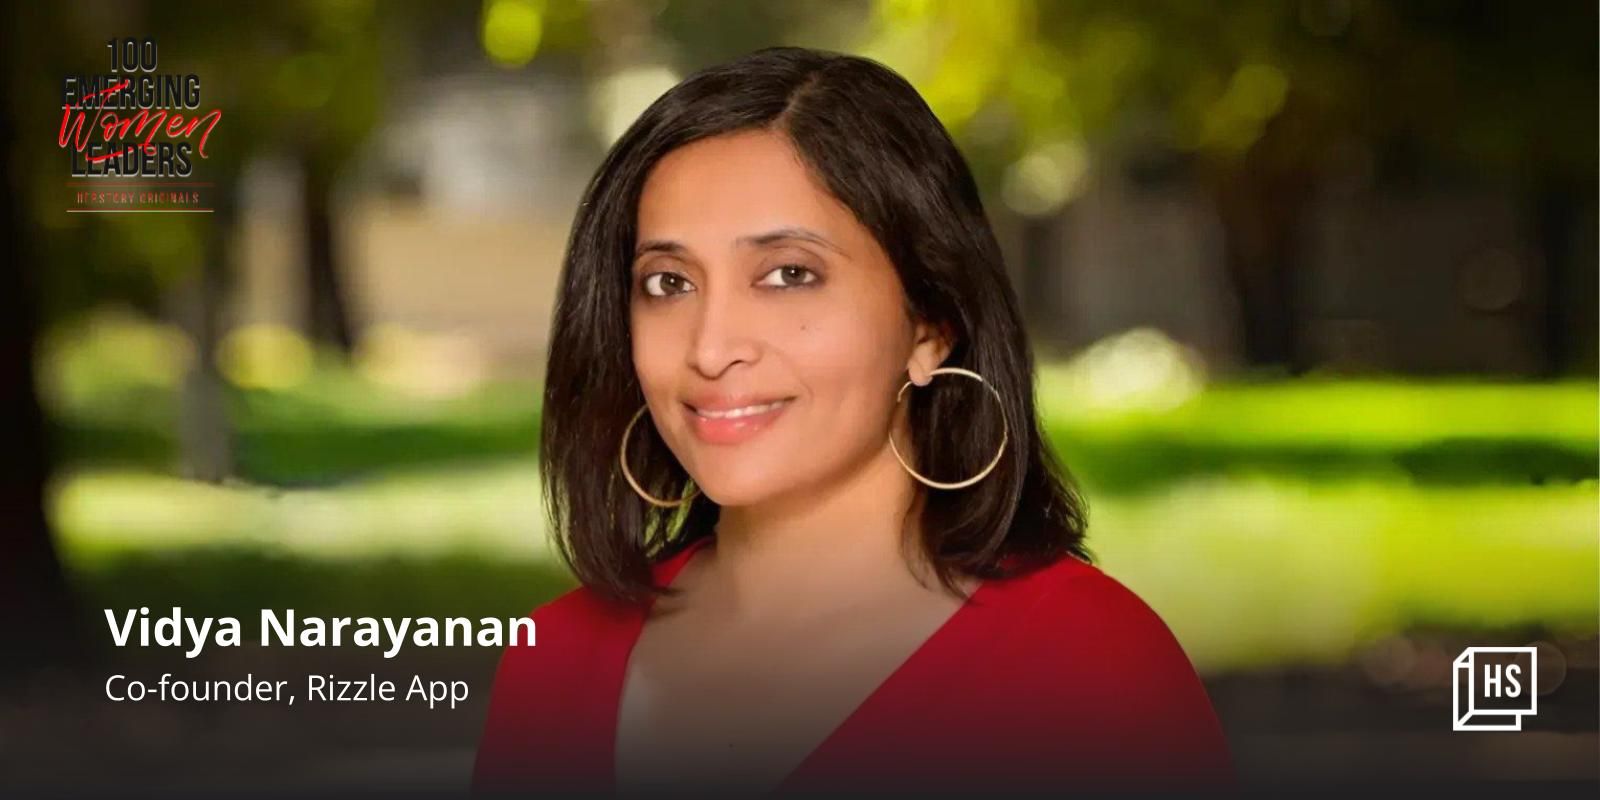 [100 Emerging Women Leaders] Meet the woman who launched short-video social app Rizzle